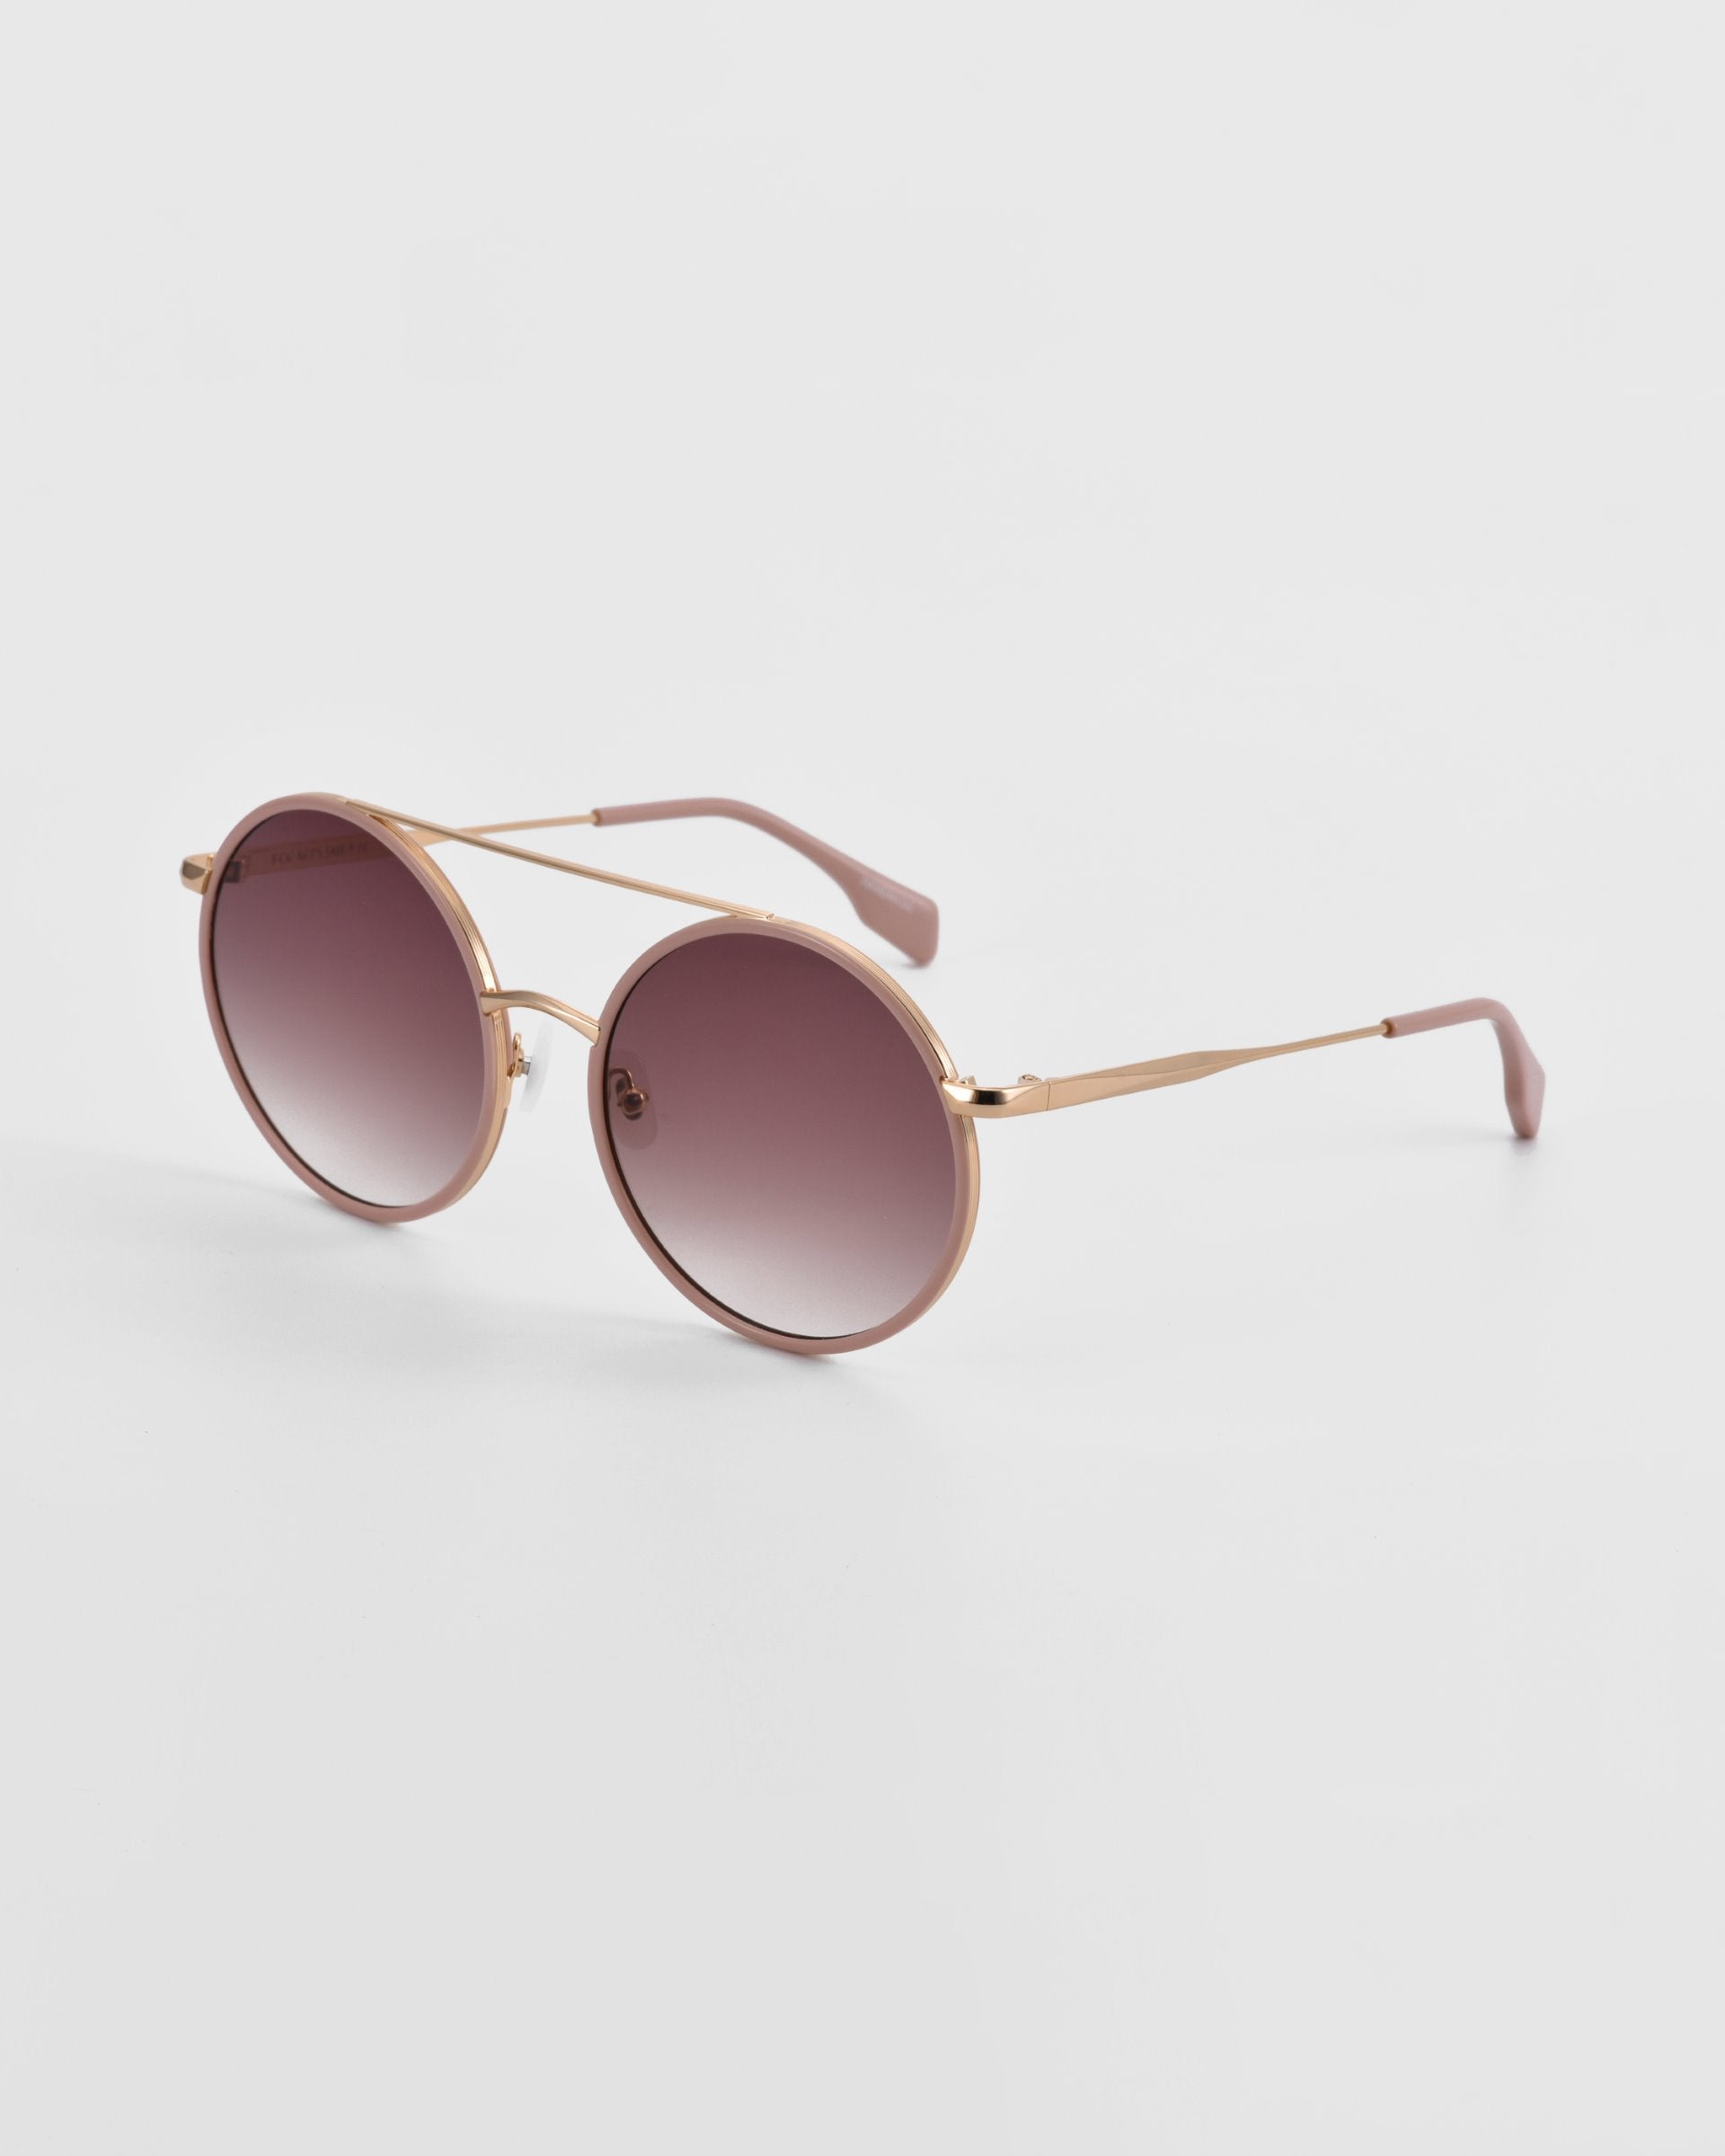 A pair of oversized round aviator sunglasses with a rose gold metal frame and gradient lenses transitioning from dark purple to light pink. Featuring jade-stone nose pads, the arms have brown tips, and the For Art&#39;s Sake® Orb sunglasses are positioned on a plain white background.